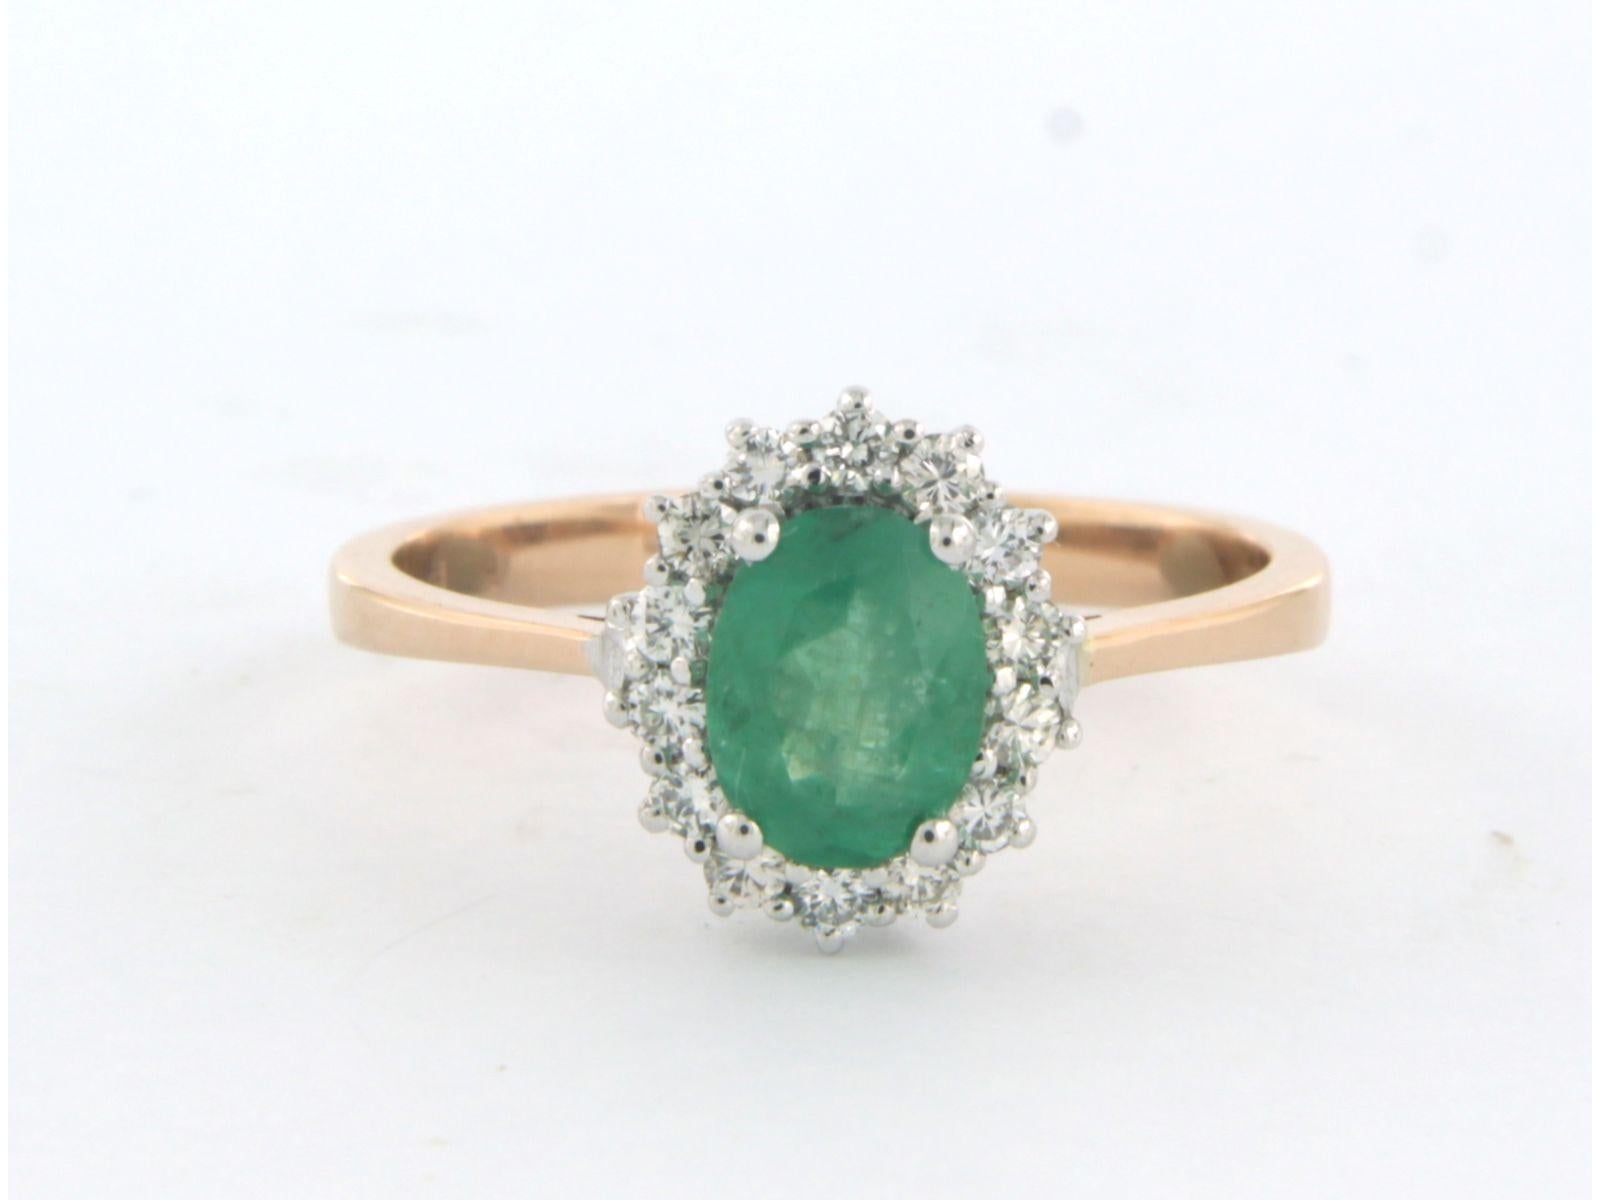 18k bicolour gold entourage ring with a central emerald 0.92 ct and a brilliant cut diamond 0.24 ct as an entourage - F/G - VS/SI - ring size U.S. 7.5 - EU. 17.5 (55)

detailed description

the top of the ring is in an oval shape of 1.1 cm by 9.5 mm